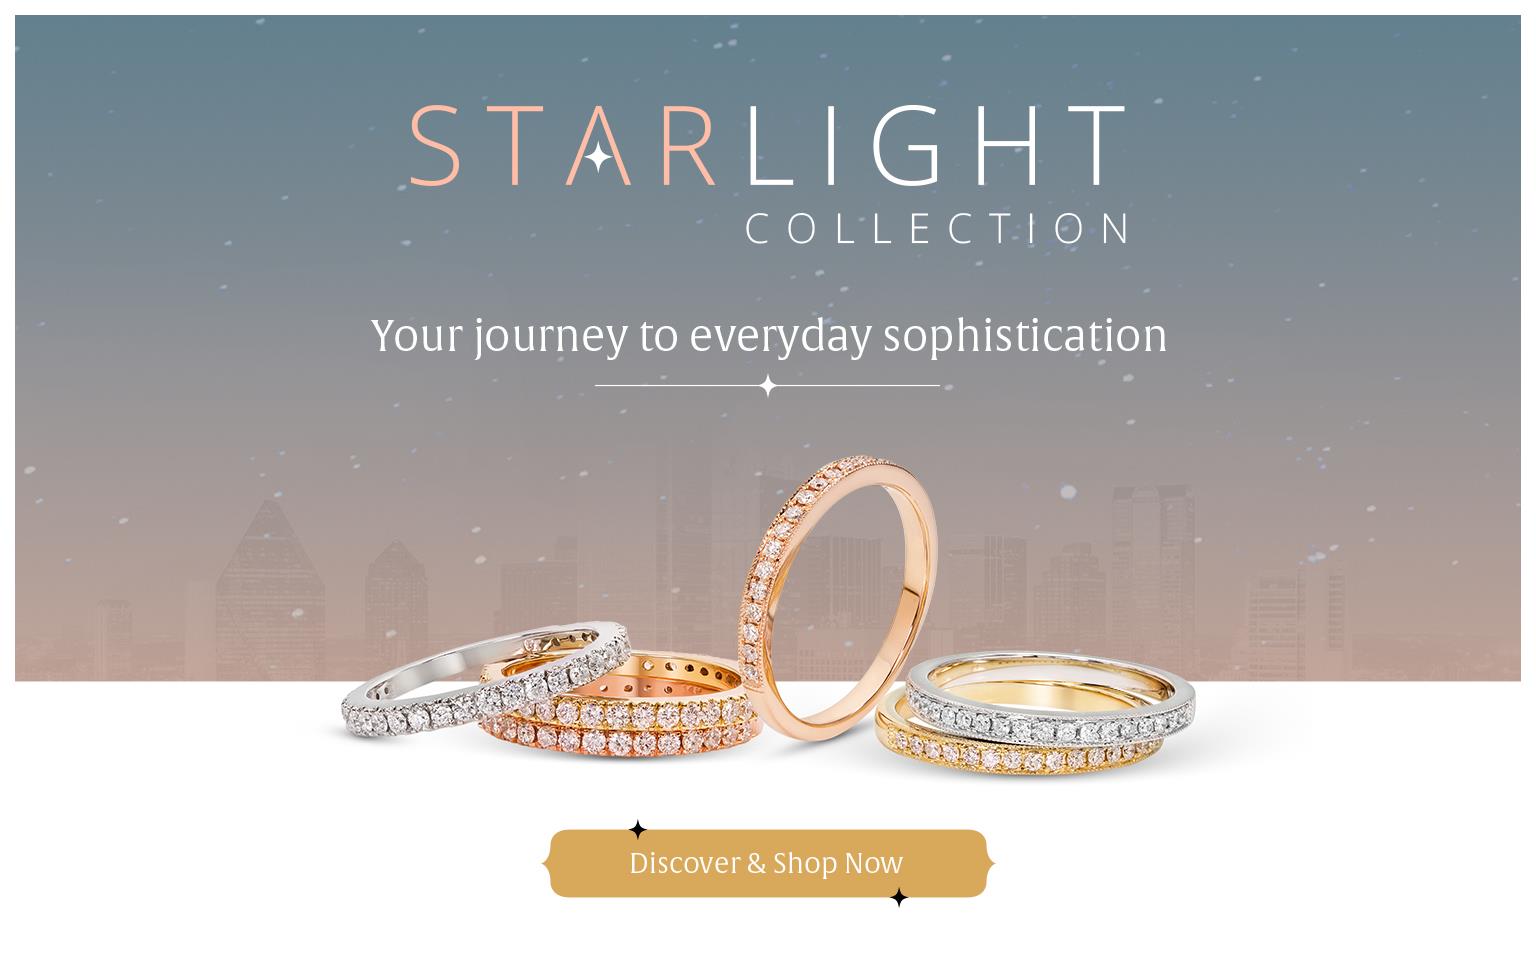 Starlight_Promotion_Mobile